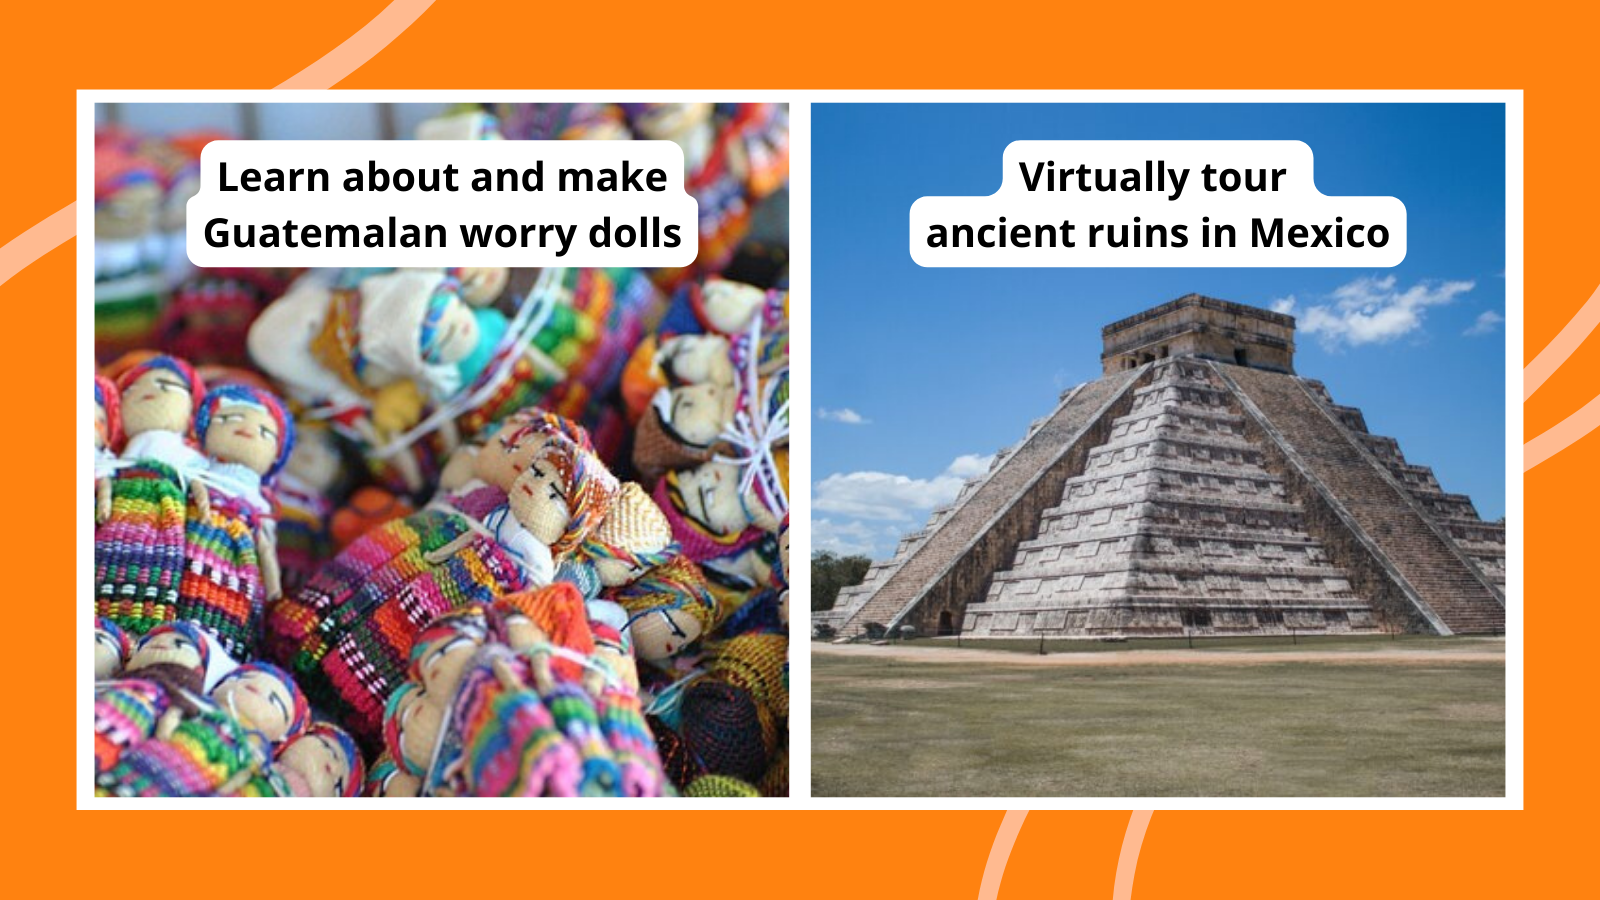 Examples of Hispanic Heritage Month activities such as making Guatemalan worry dolls and virtually visiting ancient ruins in Mexico.